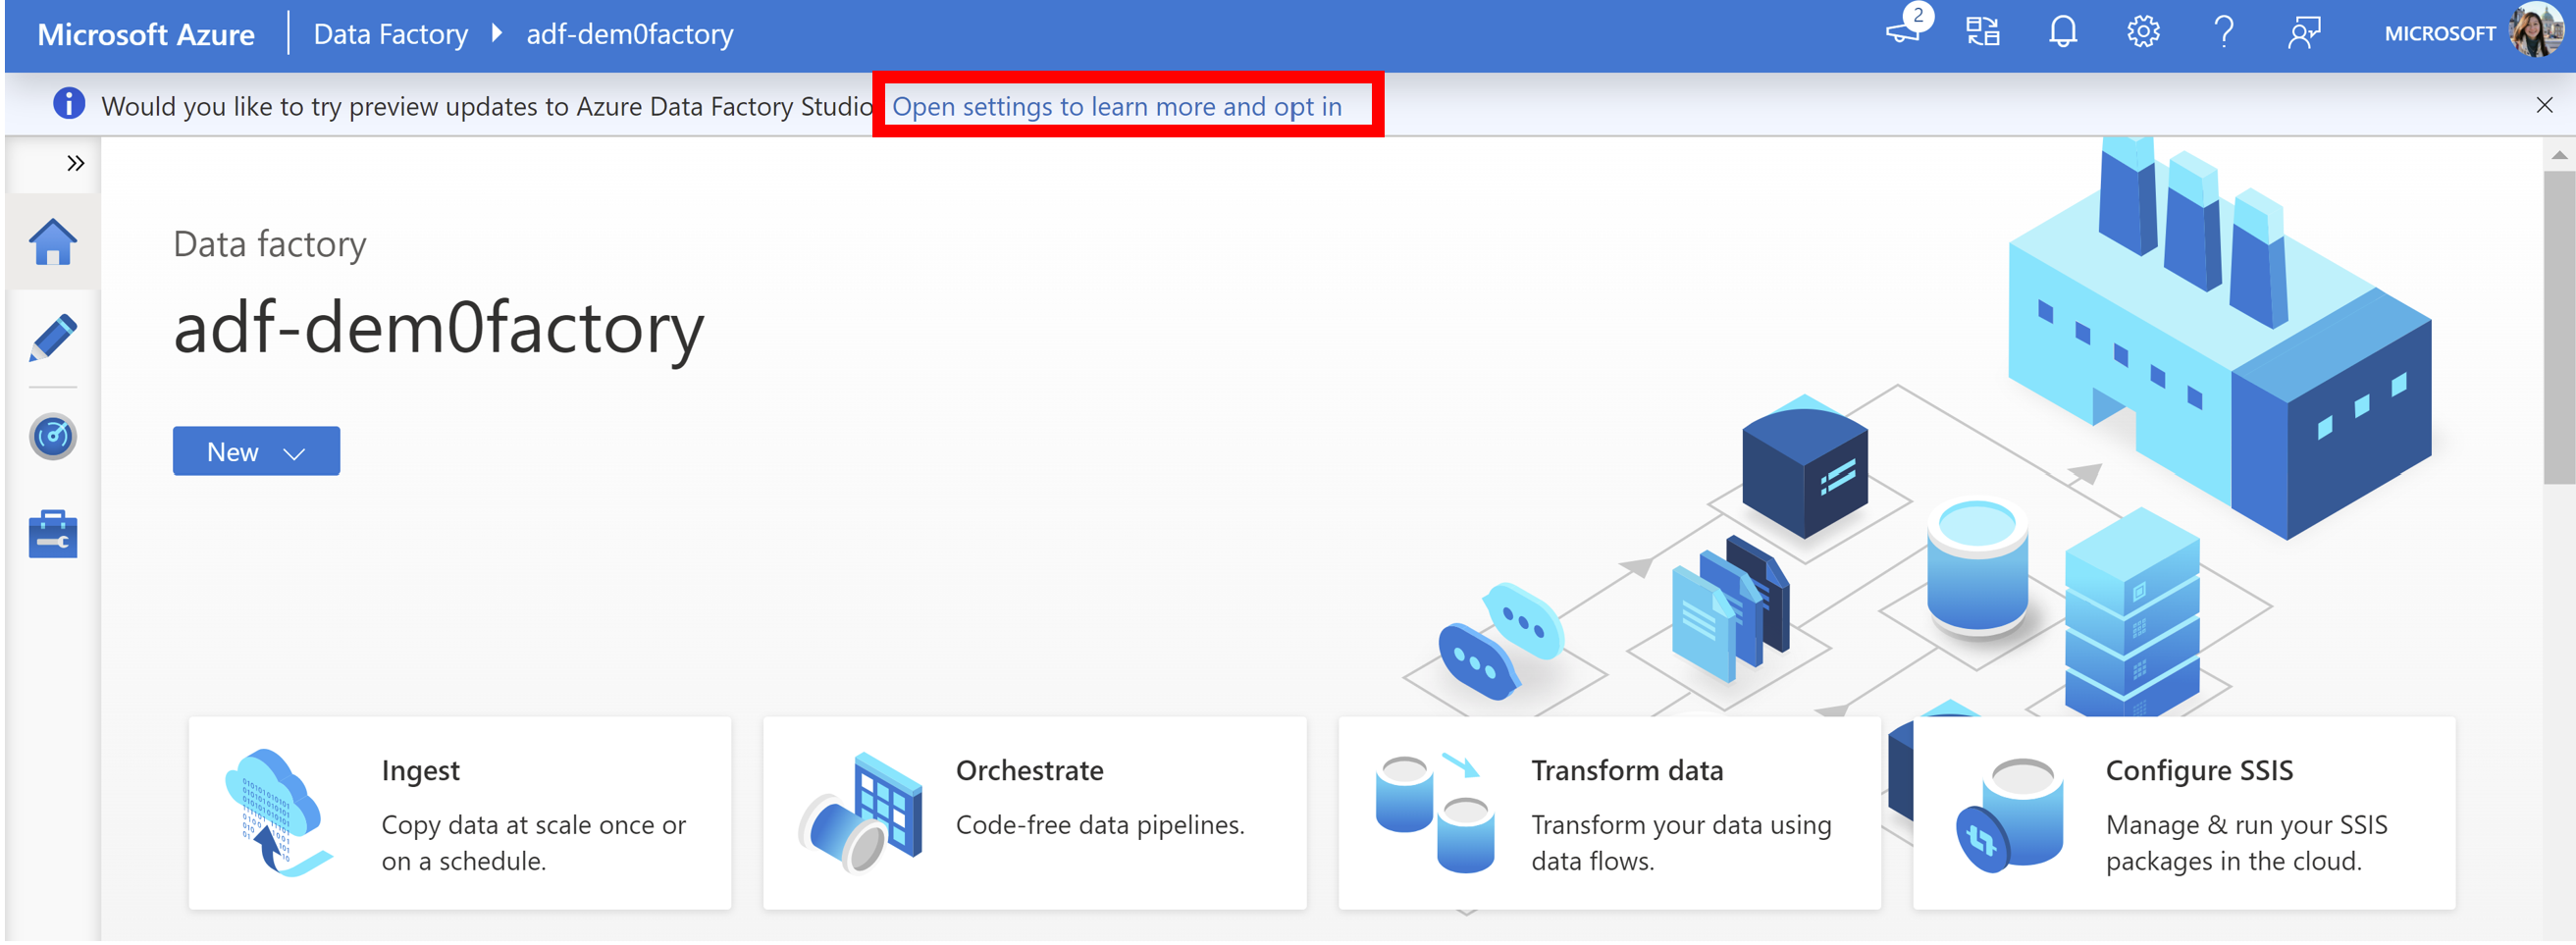 Screenshot of Azure Data Factory home page with an Opt-in option in a banner at the top of the screen.